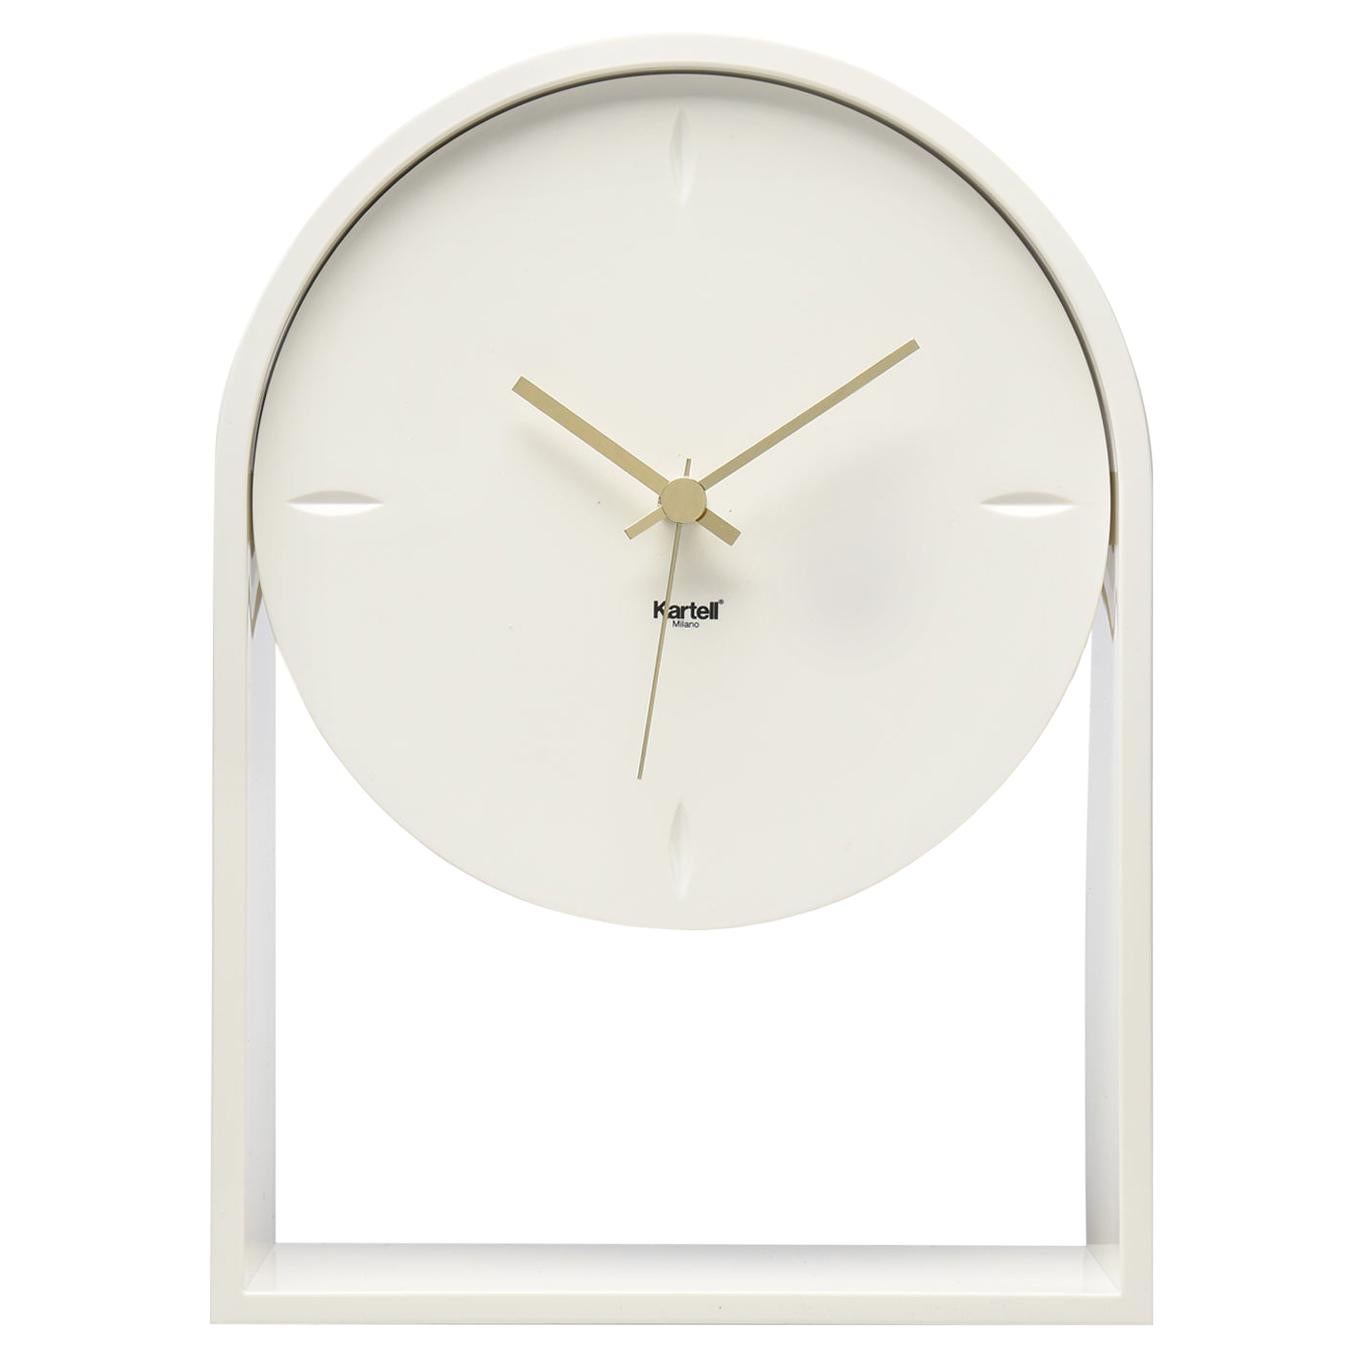 Kartell Air du Temps Table Clock in White by Eugeni Quitllet For Sale